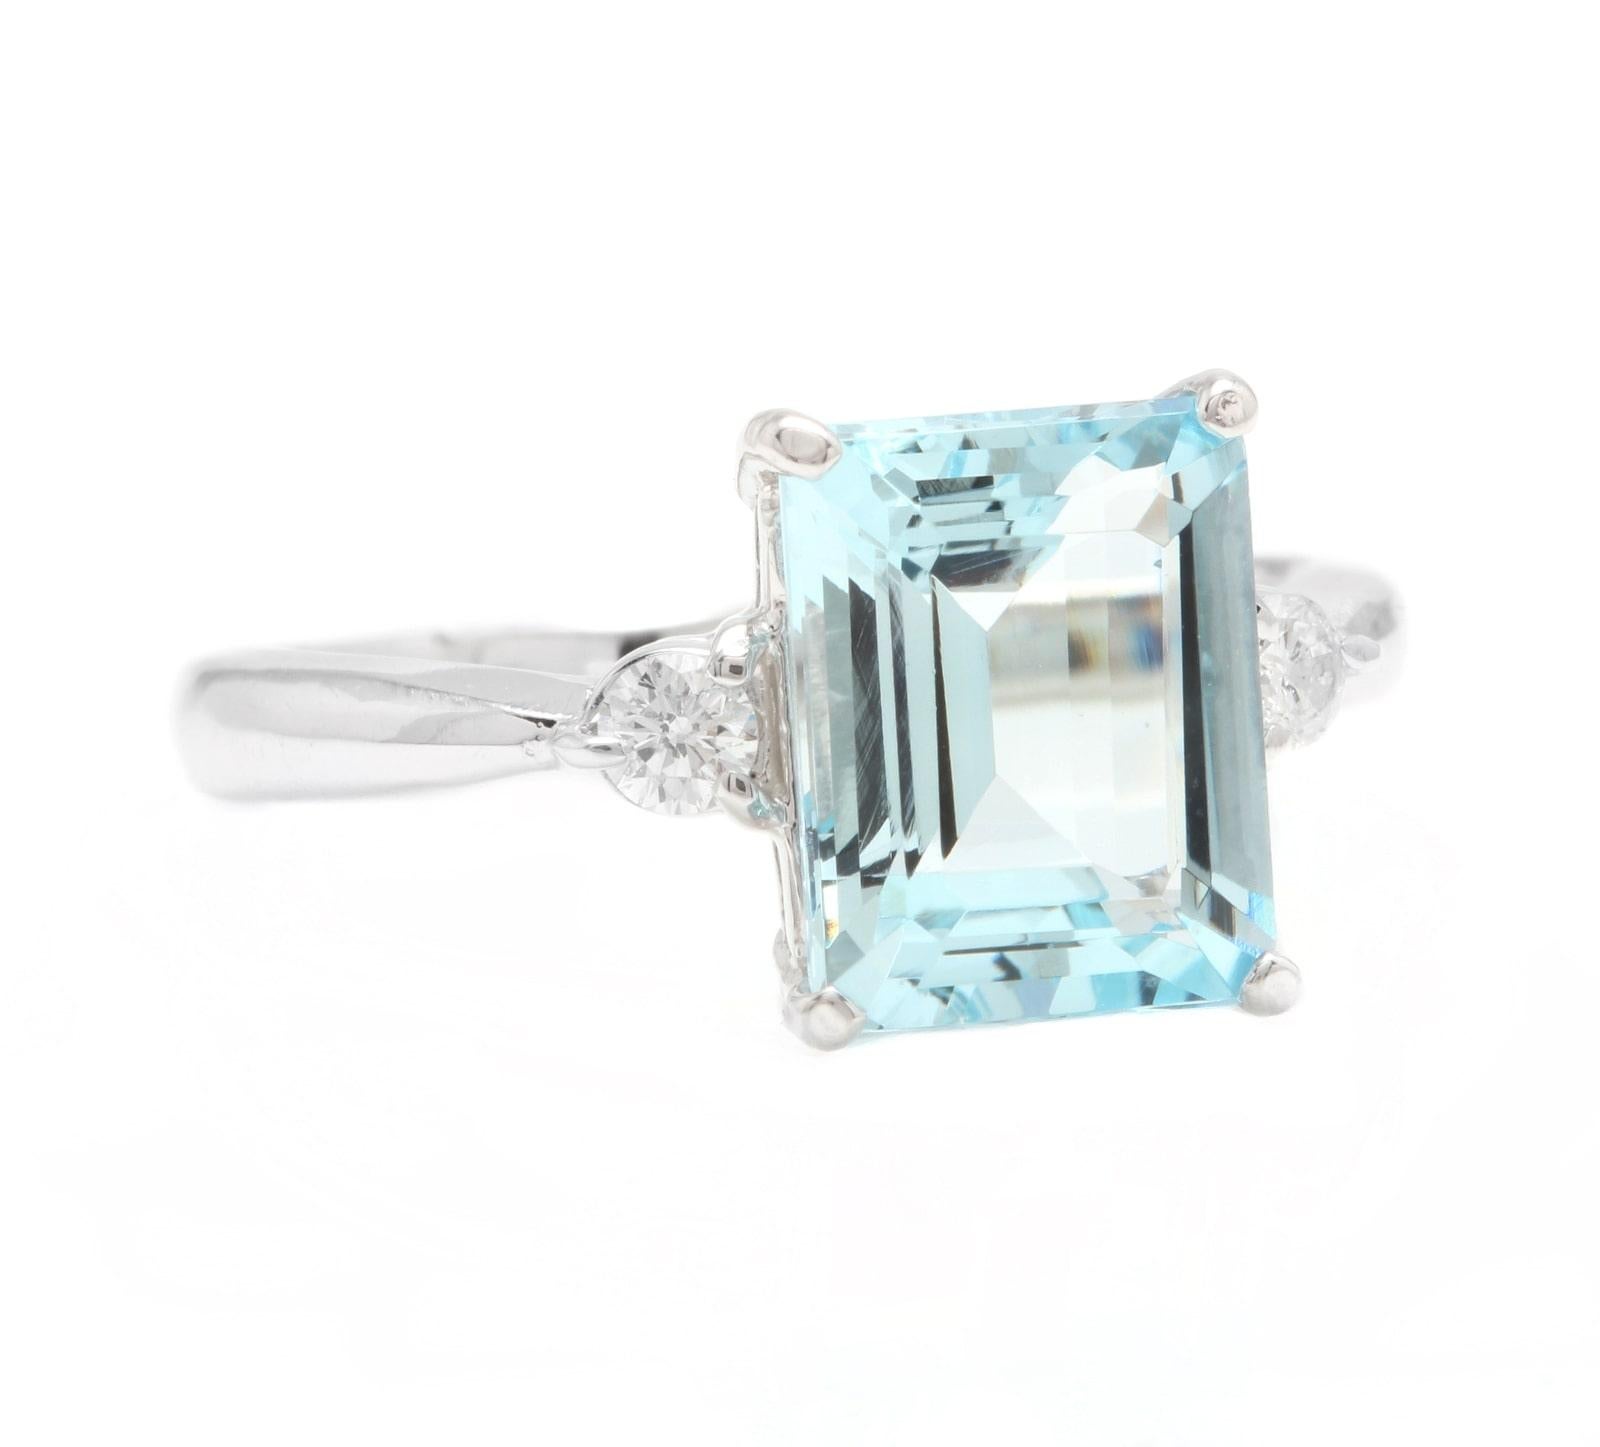 3.28 Carats Impressive Natural Aquamarine and Diamond 14K White Gold Ring

Suggested Replacement Value: Approx. $3,500.00

Total Natural Aquamarine Weight is: Approx. 3.10 Carats

Aquamarine Measures: Approx. 10.00 x 8.00mm

Natural Round Diamonds